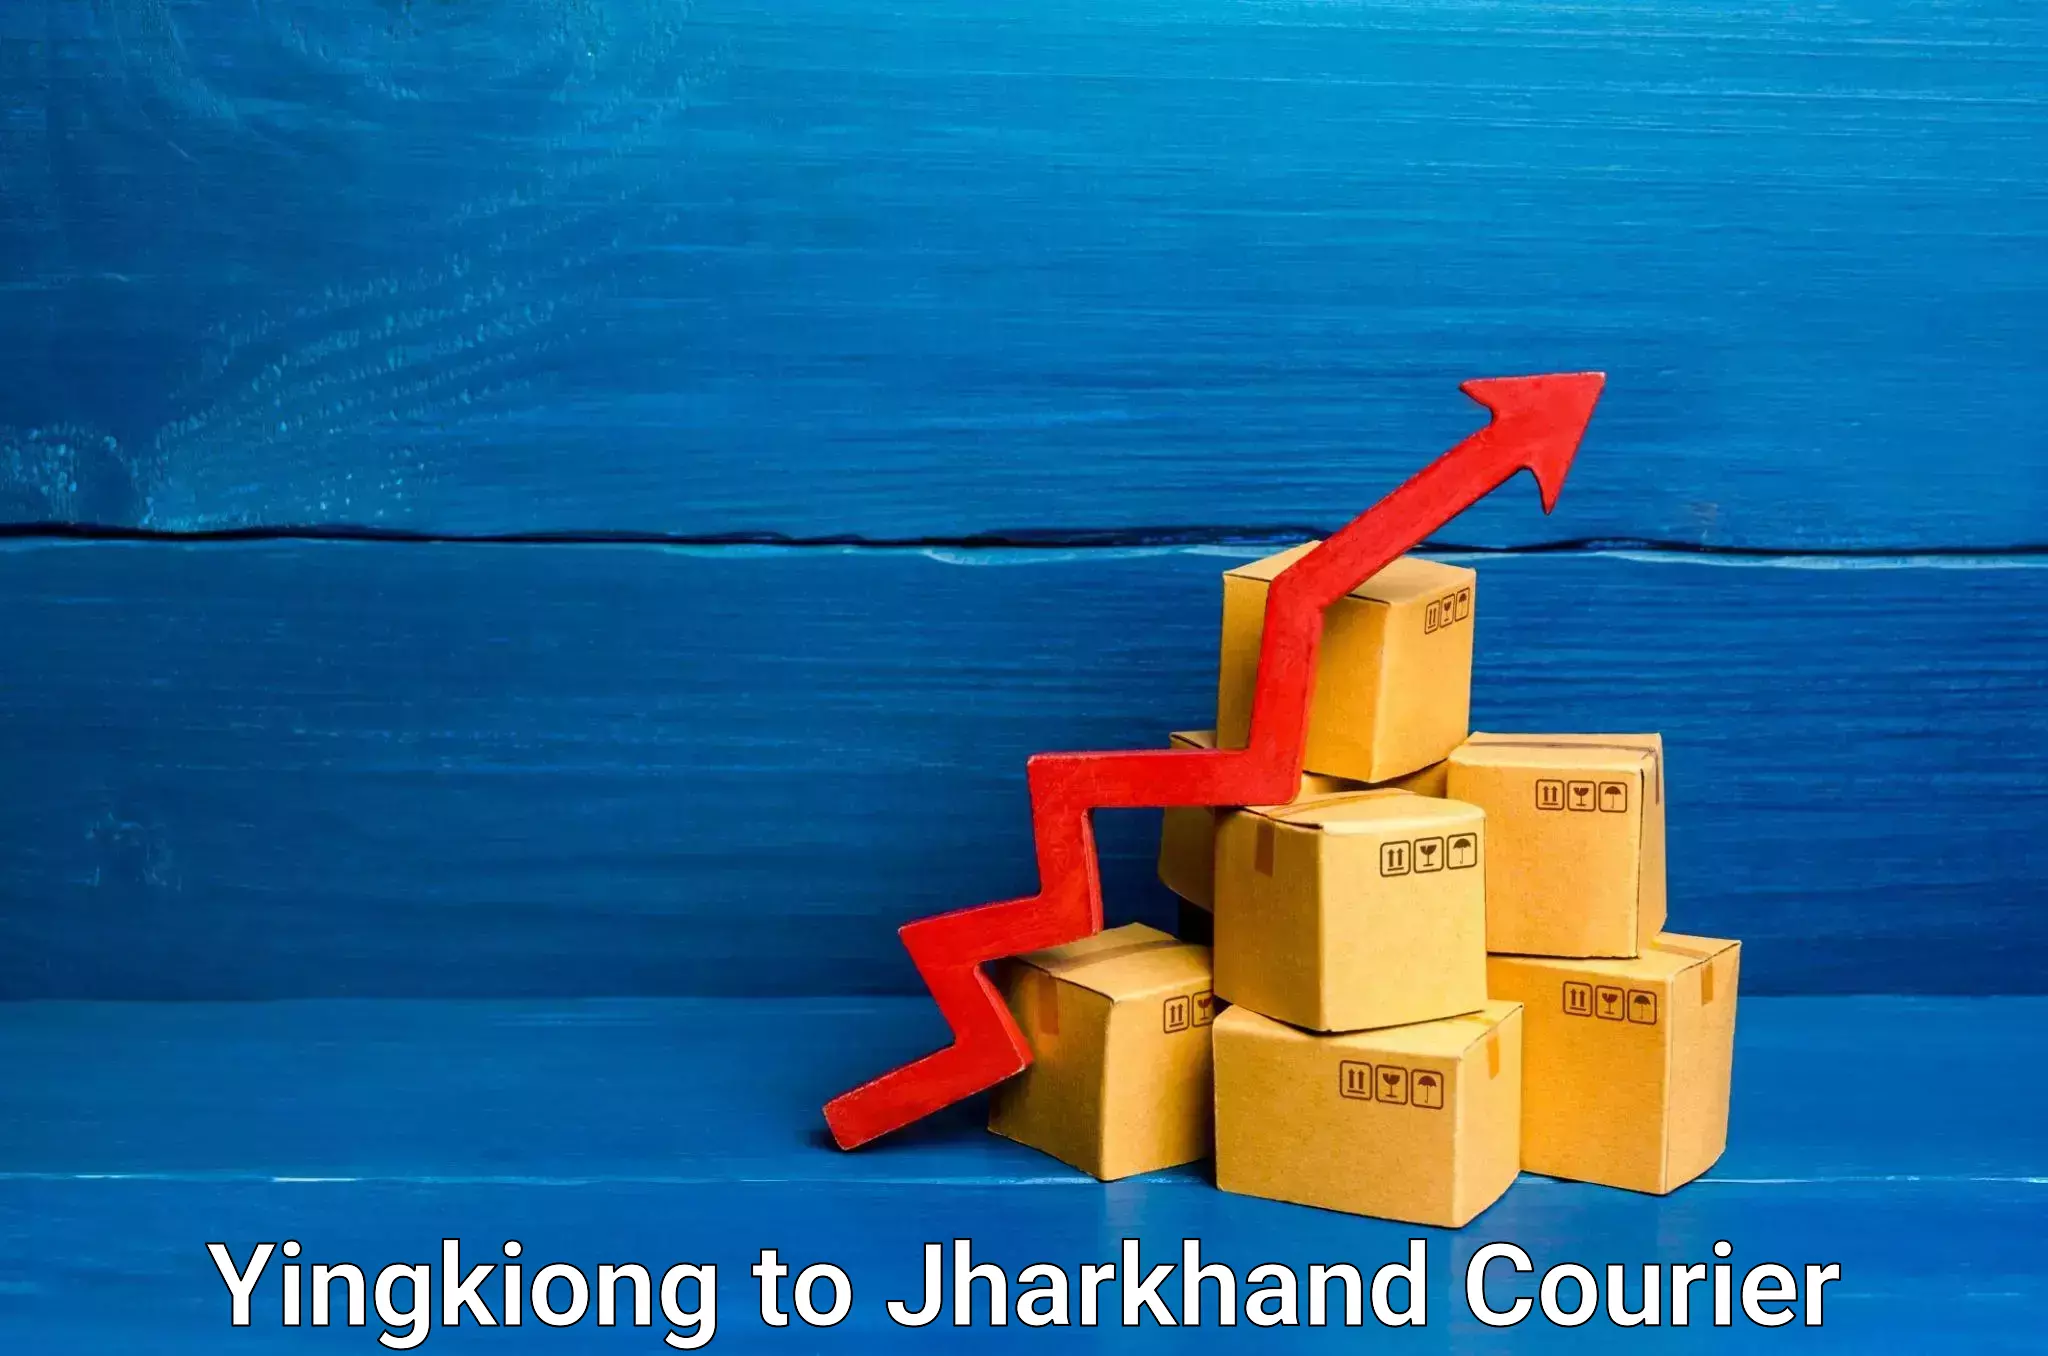 Urgent courier needs Yingkiong to Jamshedpur